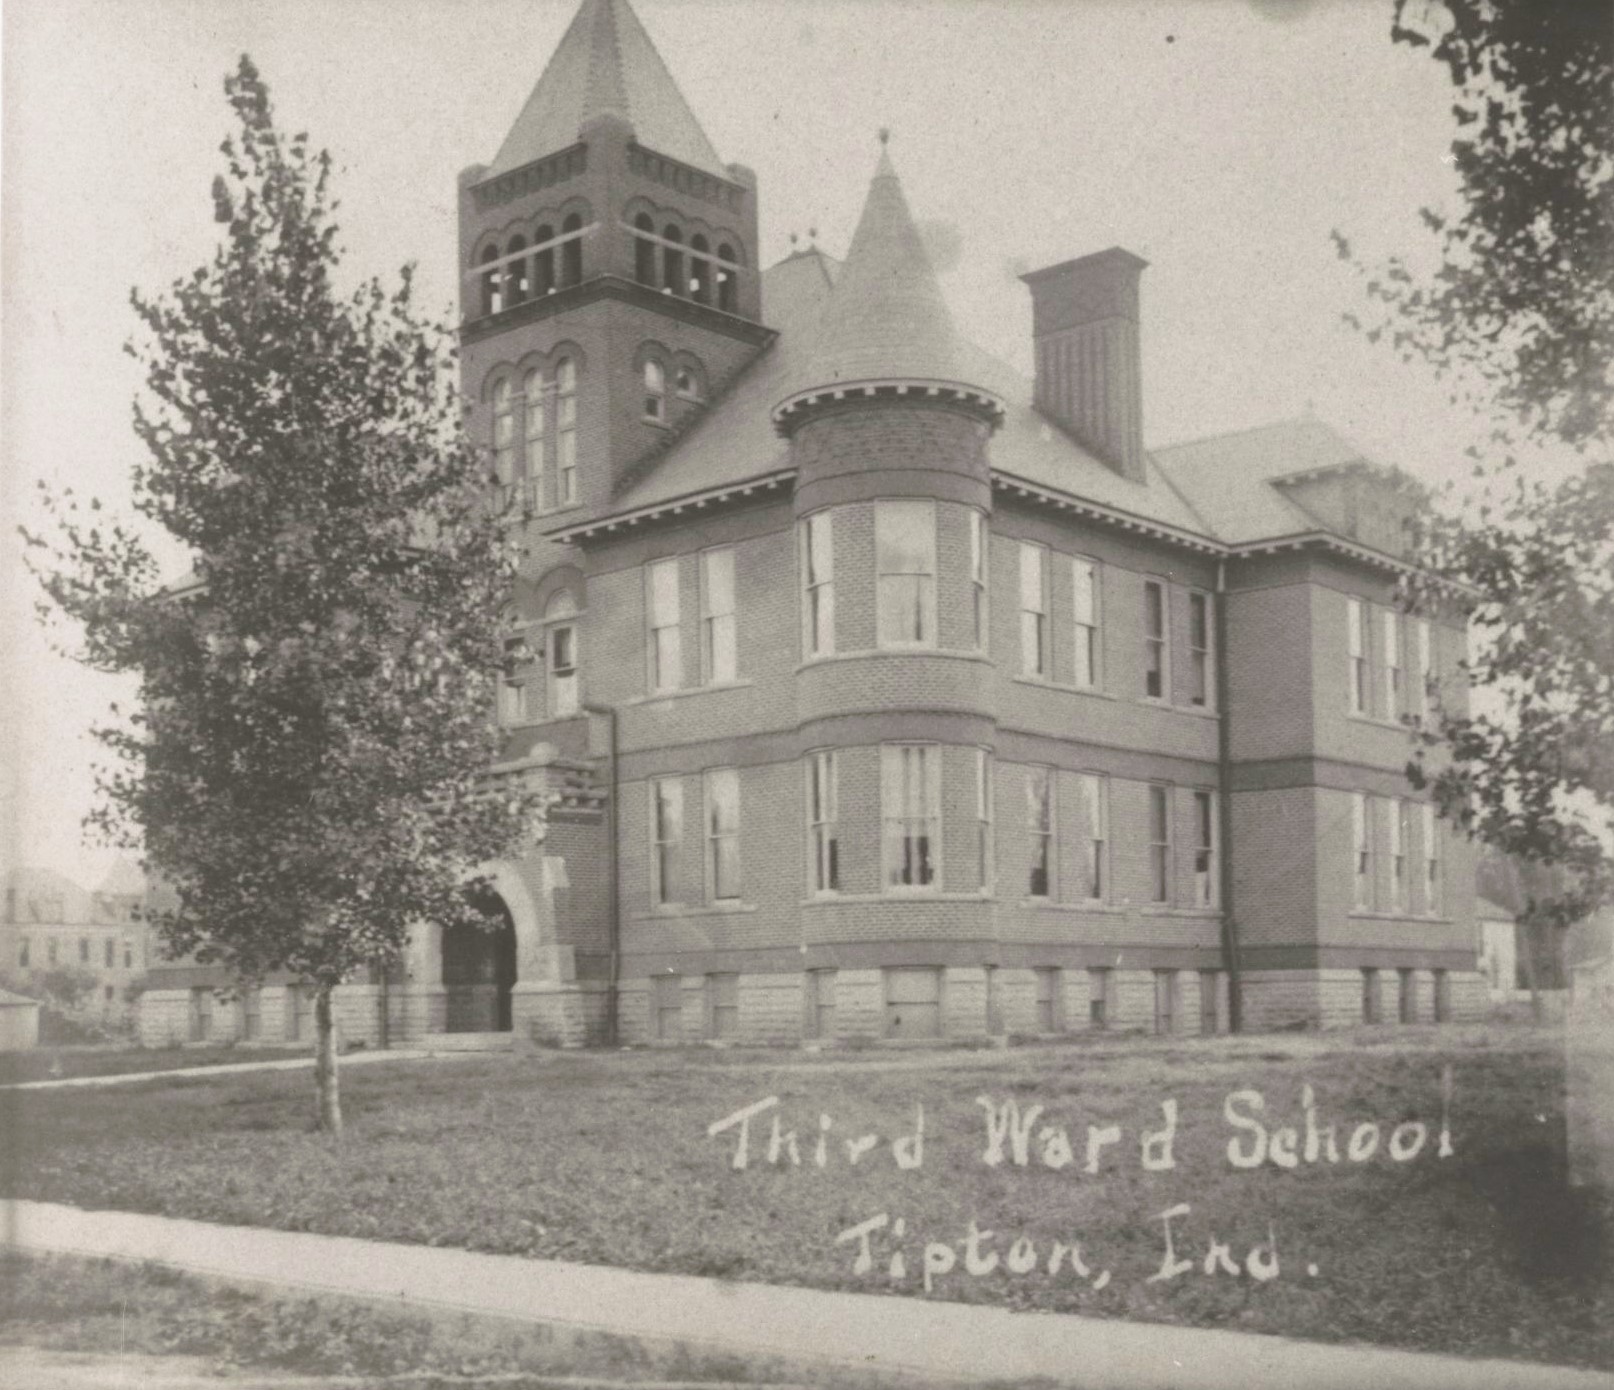 Third Ward School nearly had the look of an old castle or church with its pointed towers. It has gorgeous architecture.